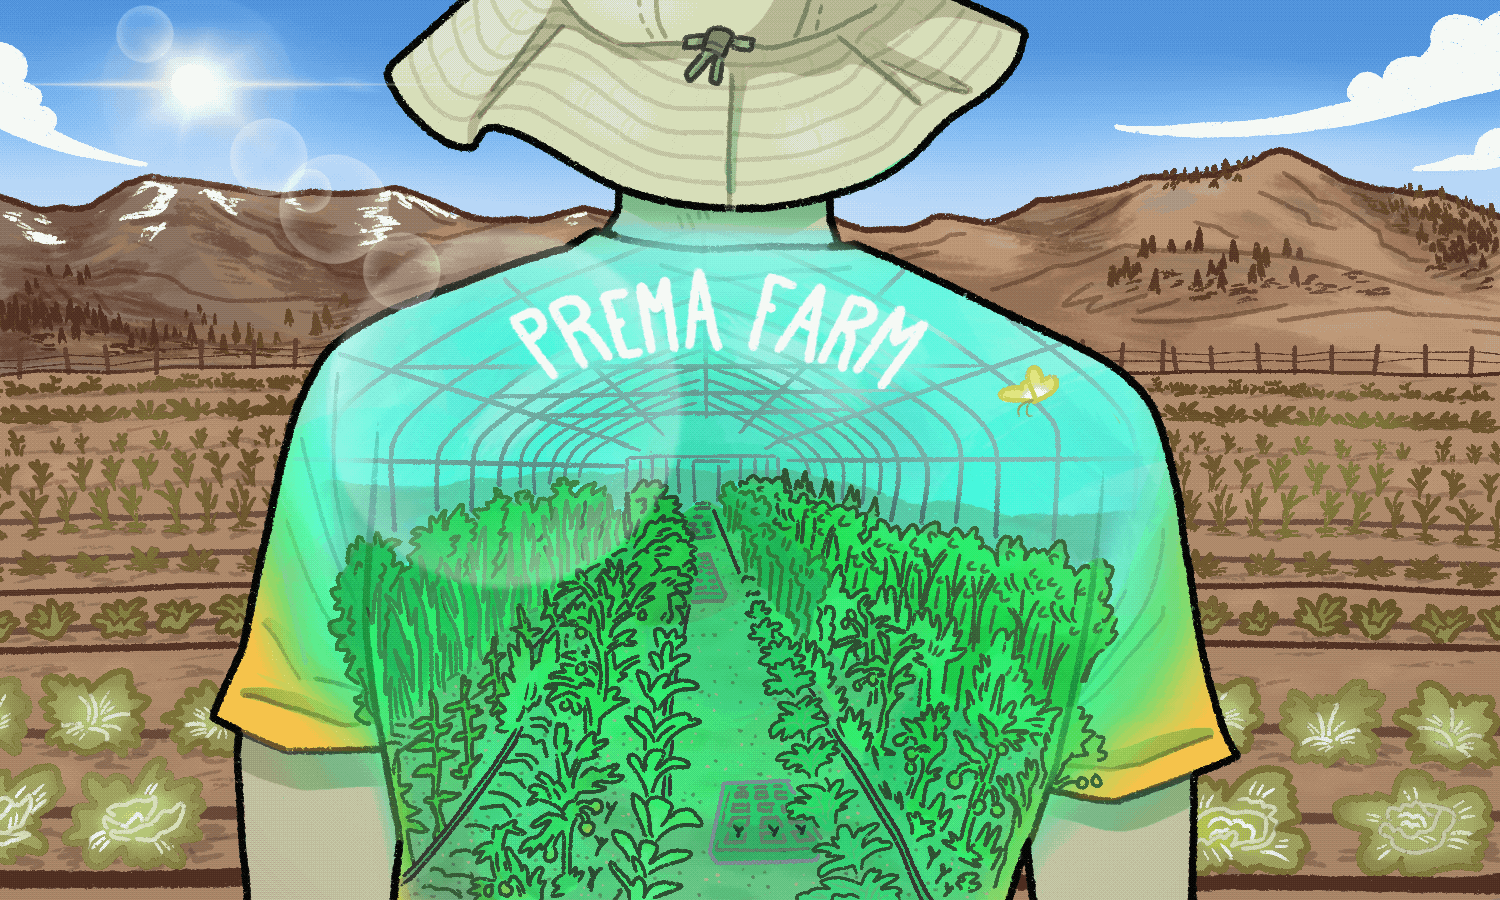 An animated illustration with a man's back facing forward. Within the outline of his shirt, there is a greenhouse with several crops growing and a butterfly flying. Outside of the shirt, in the rest of the composition, there are fields with produce in a desert-like terrain.